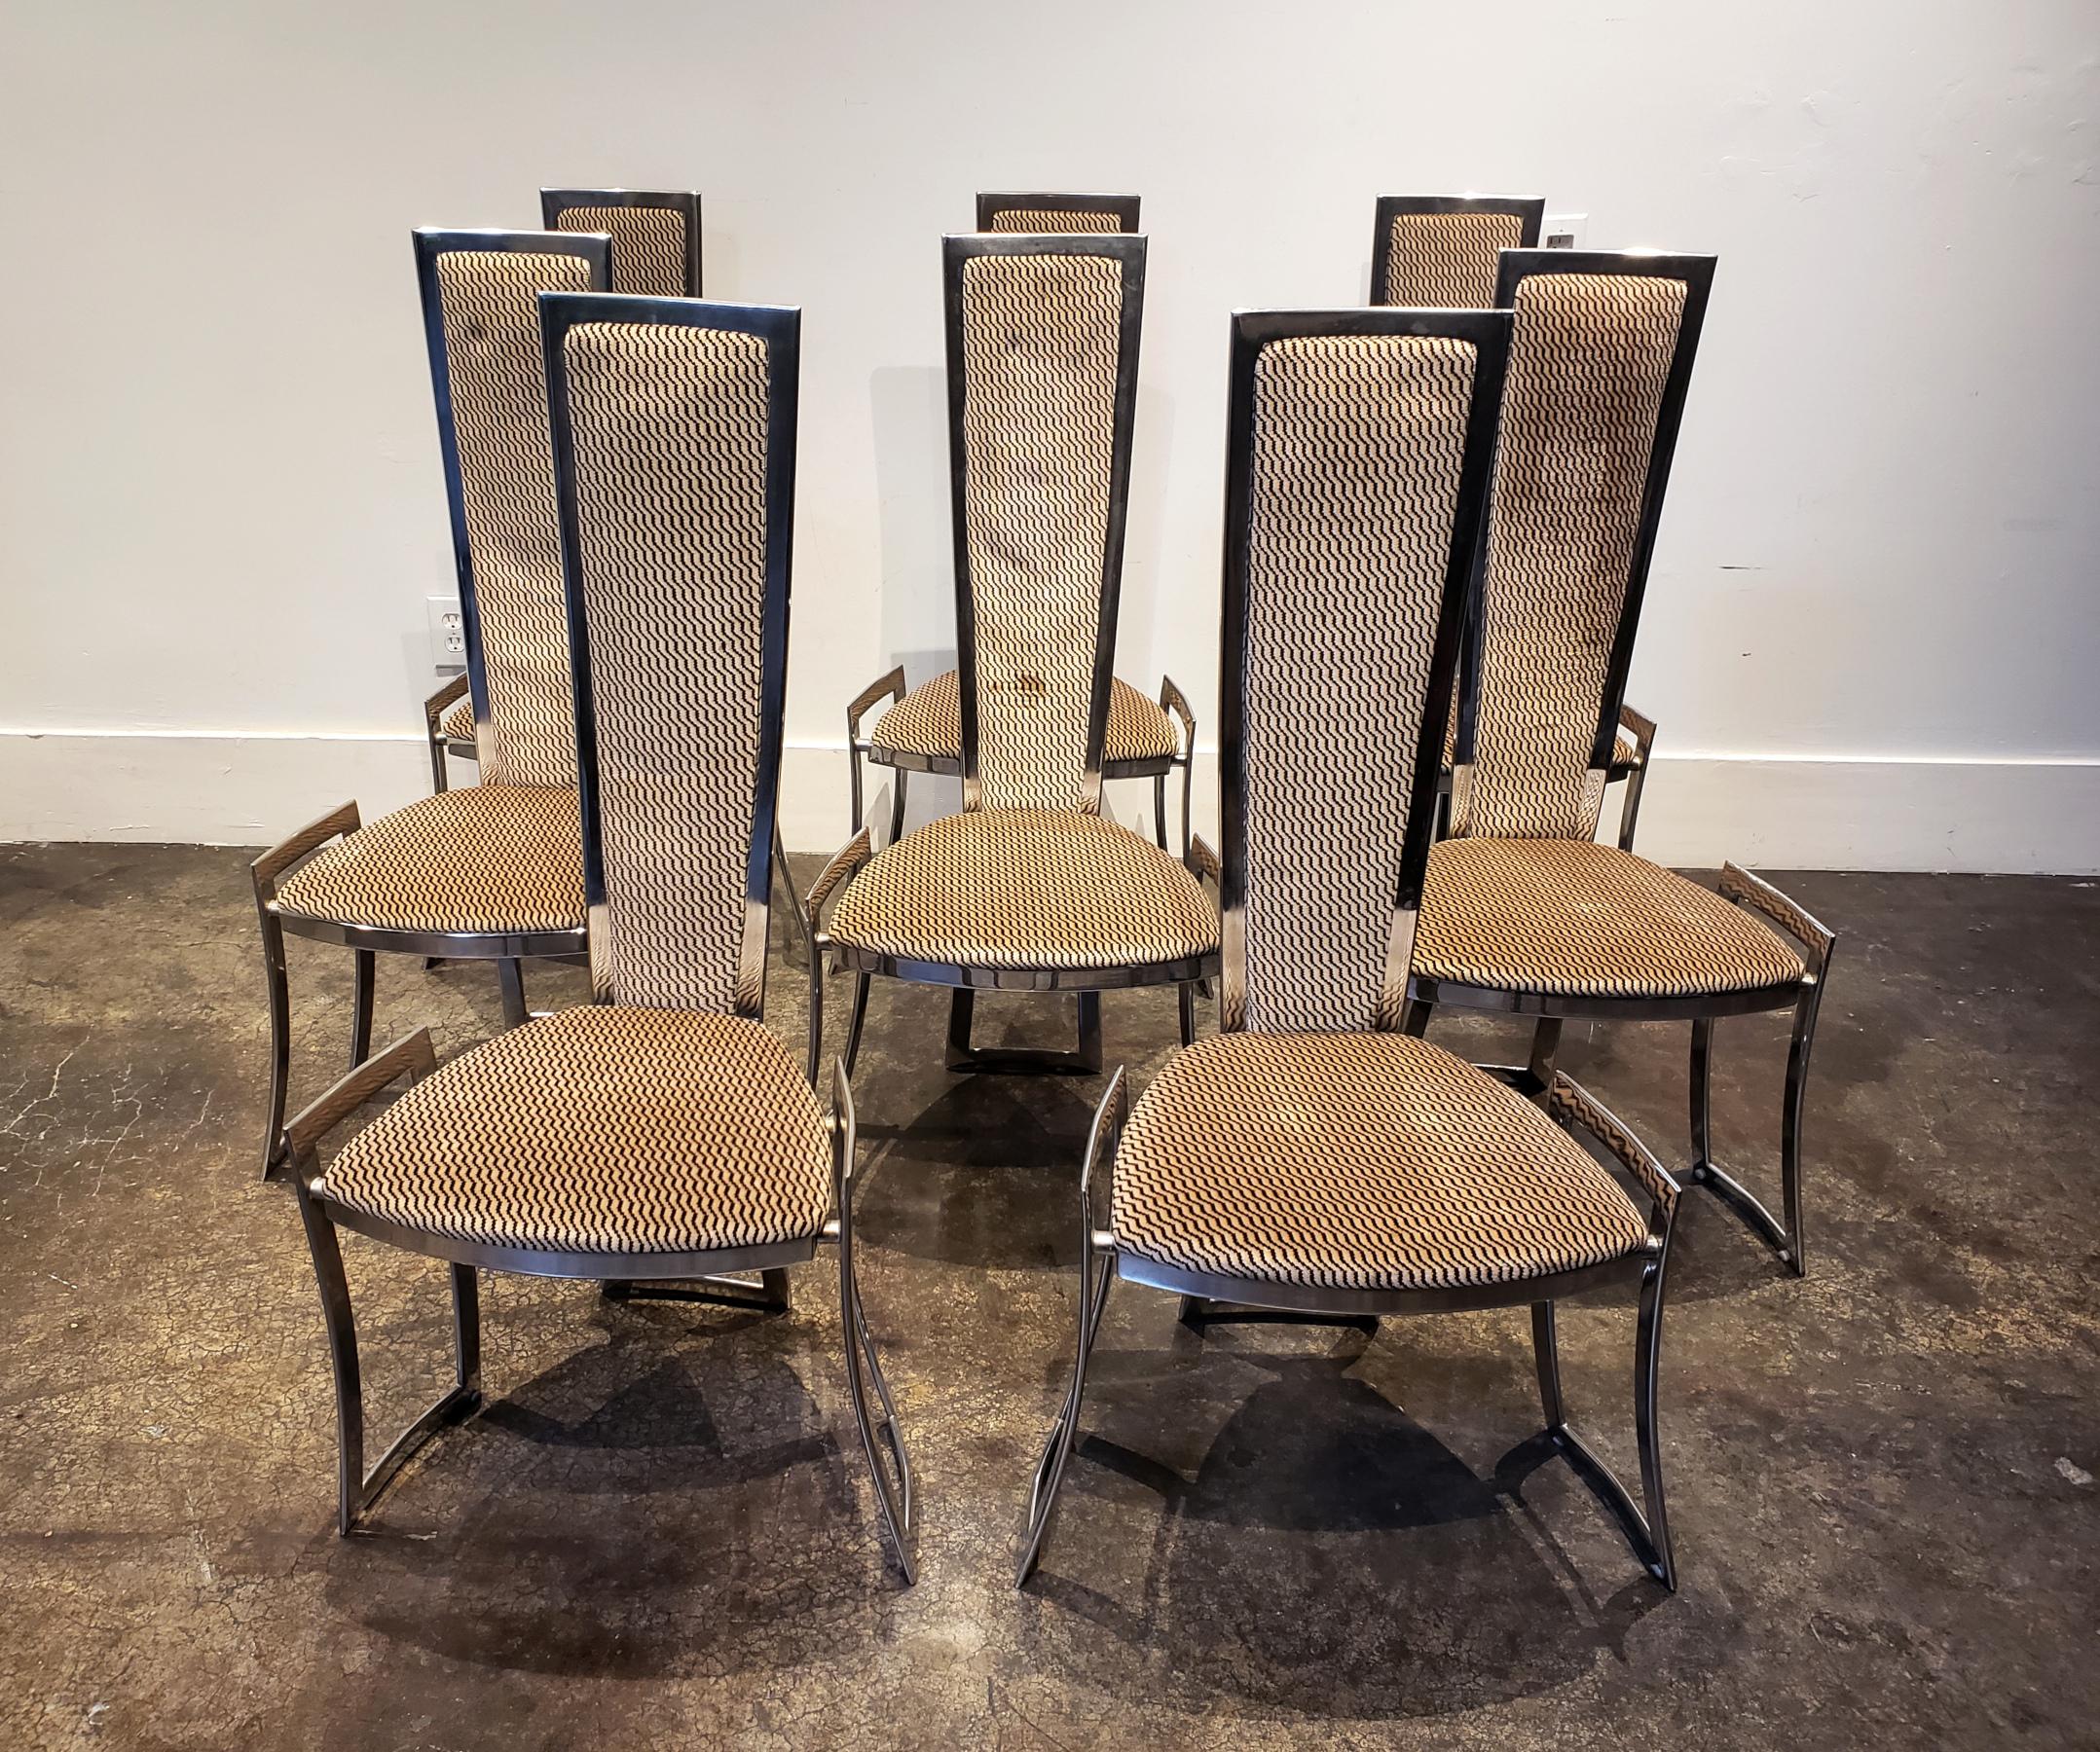 A stunning set of eight Adrian Pearsall Mid-Century Modern, polished steel, high-back dining chairs circa 1970s. Chairs have curved, rectangular, cut-out legs and original zig -zag black on tan upholstery.